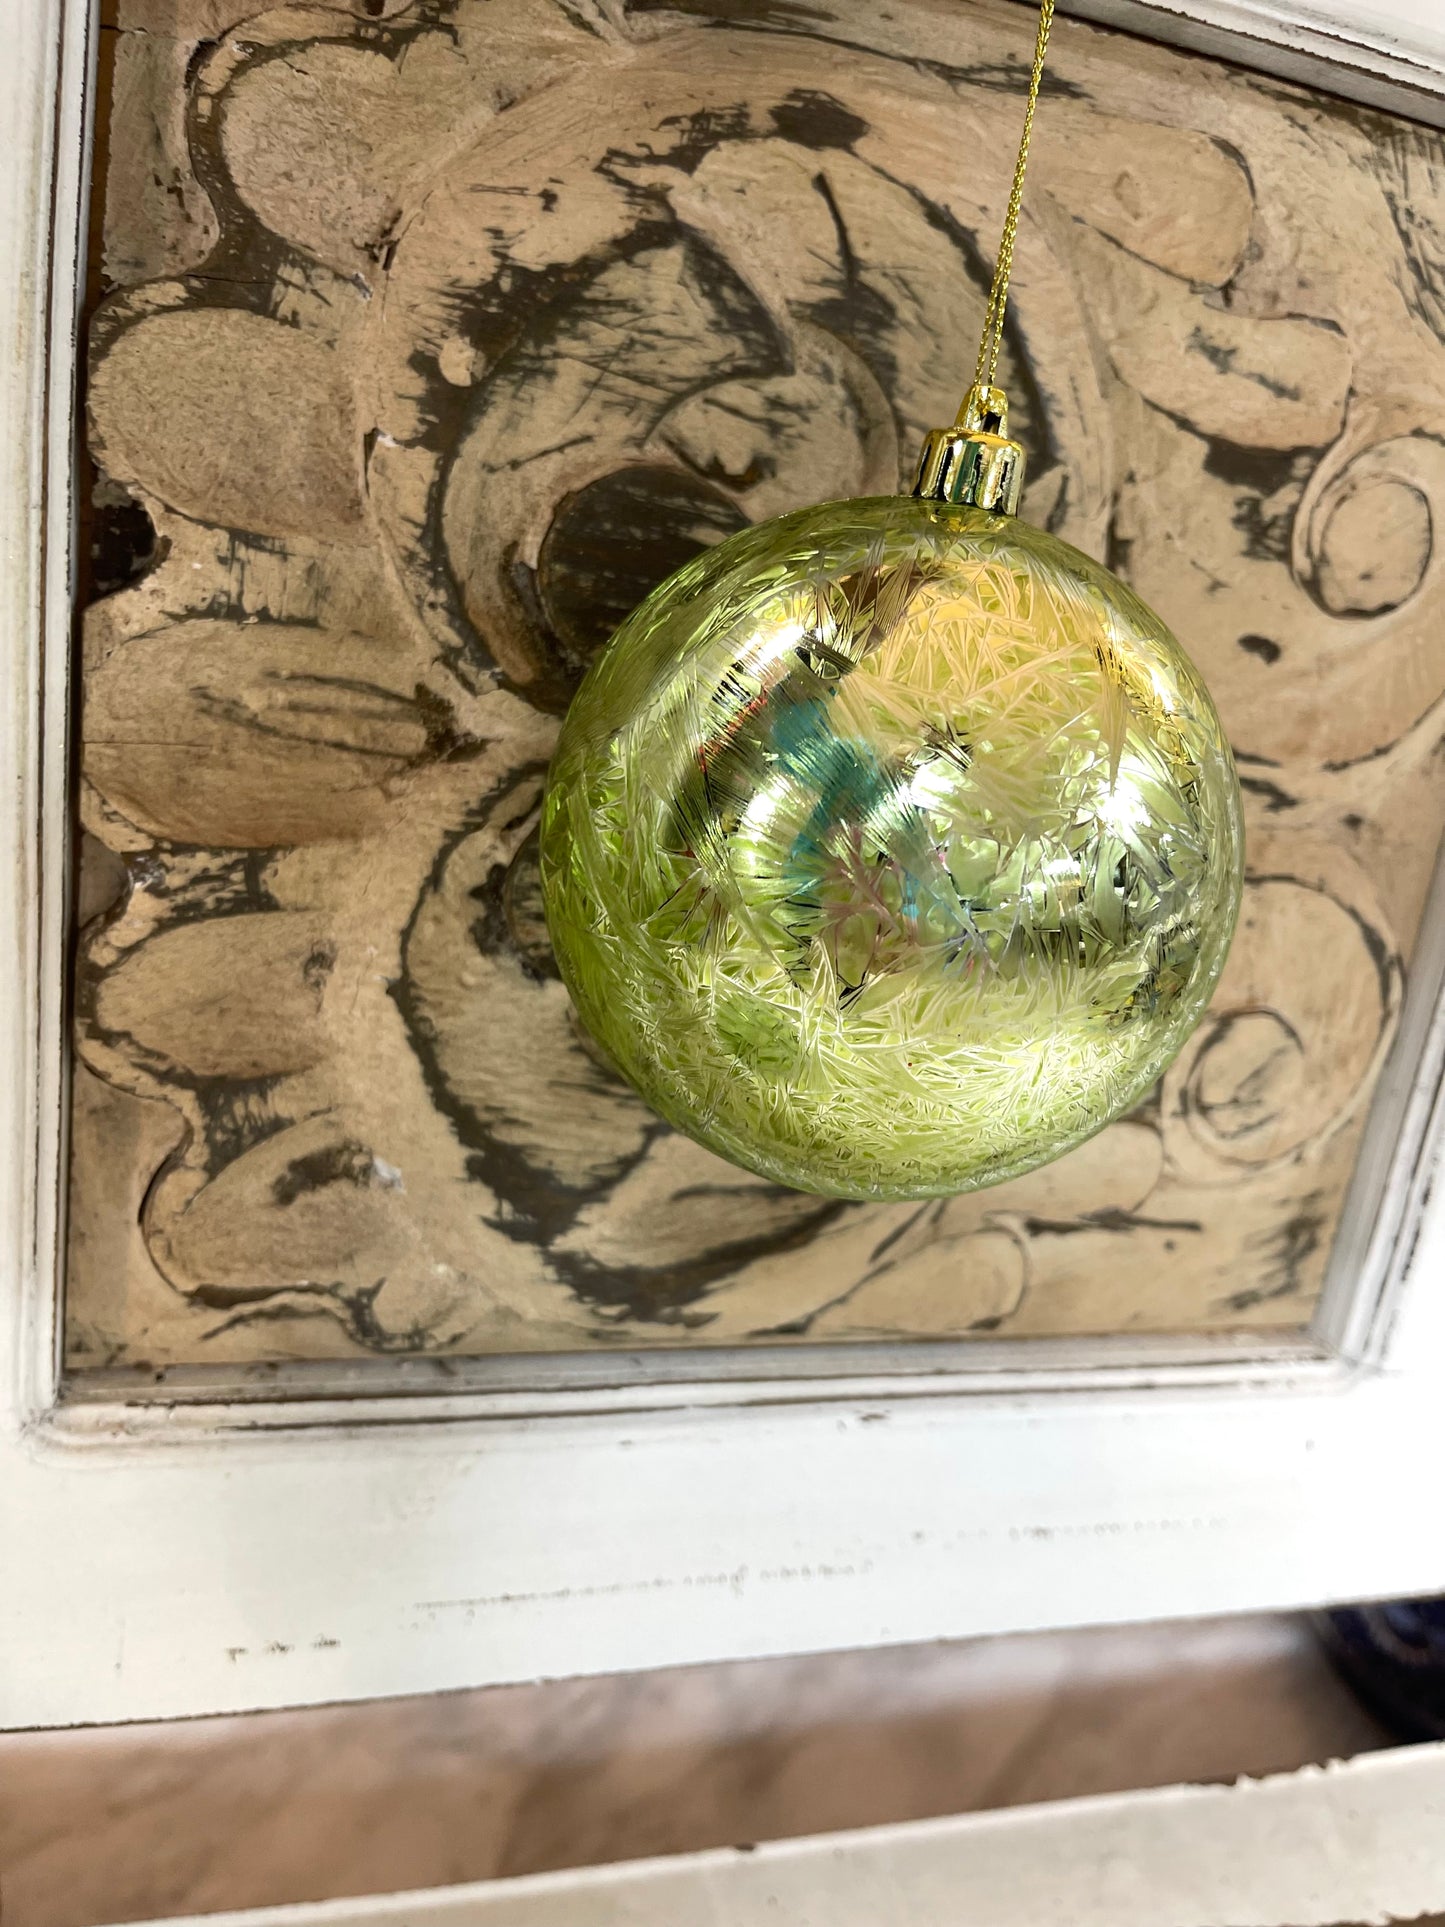 Green Feather Smooth Ball Ornament